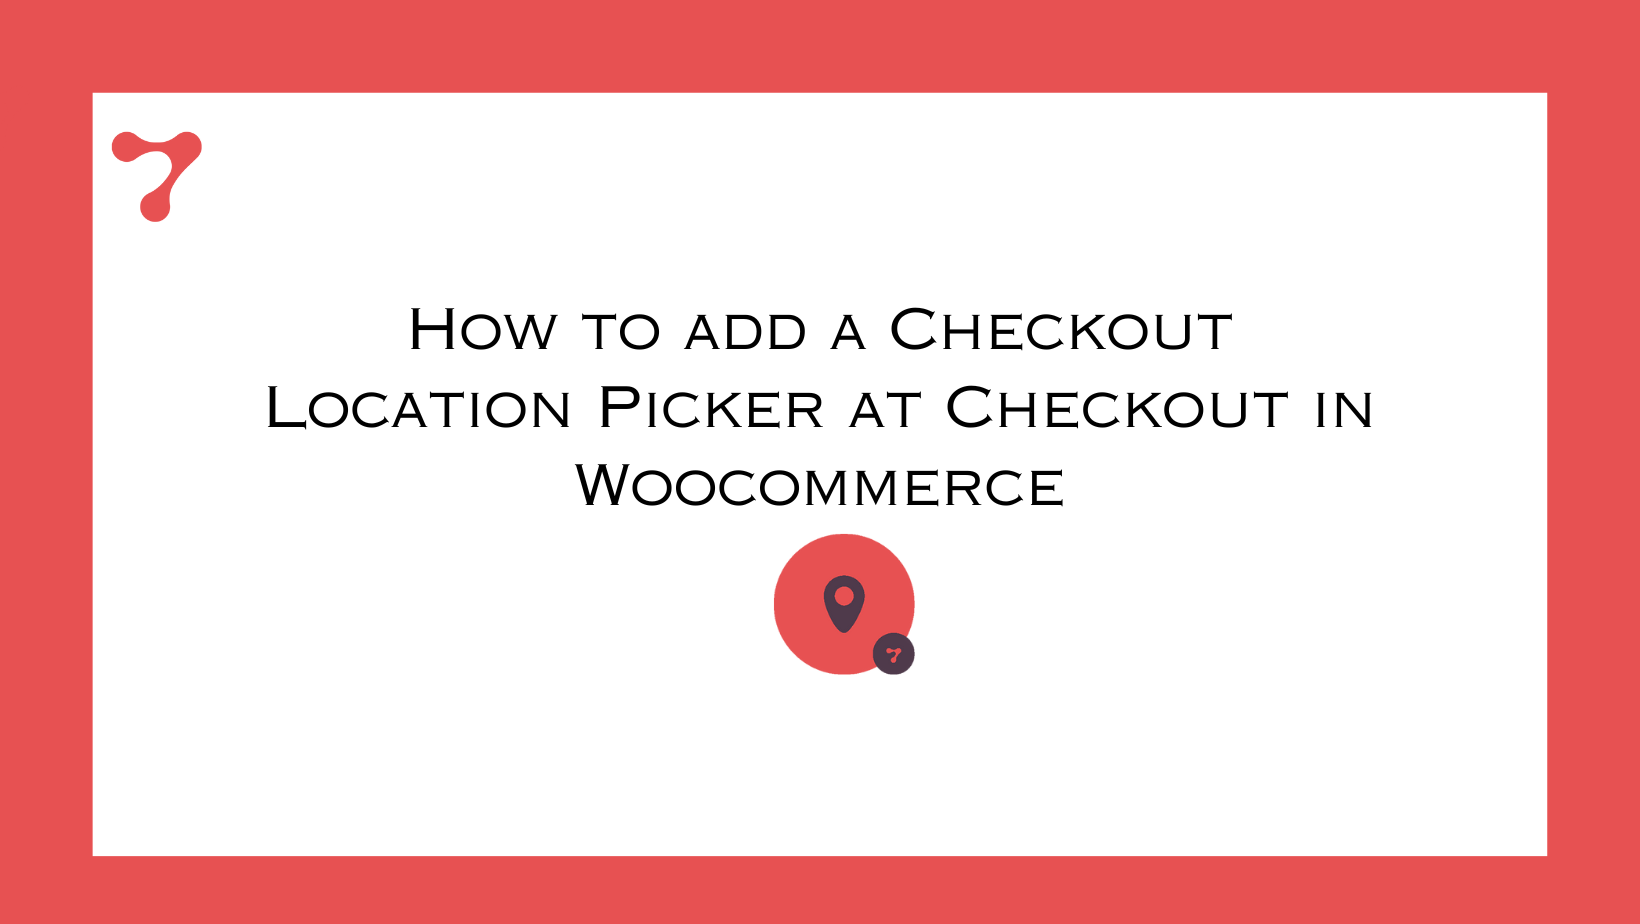 How to add a Checkout Location Picker at Checkout in Woocommerce